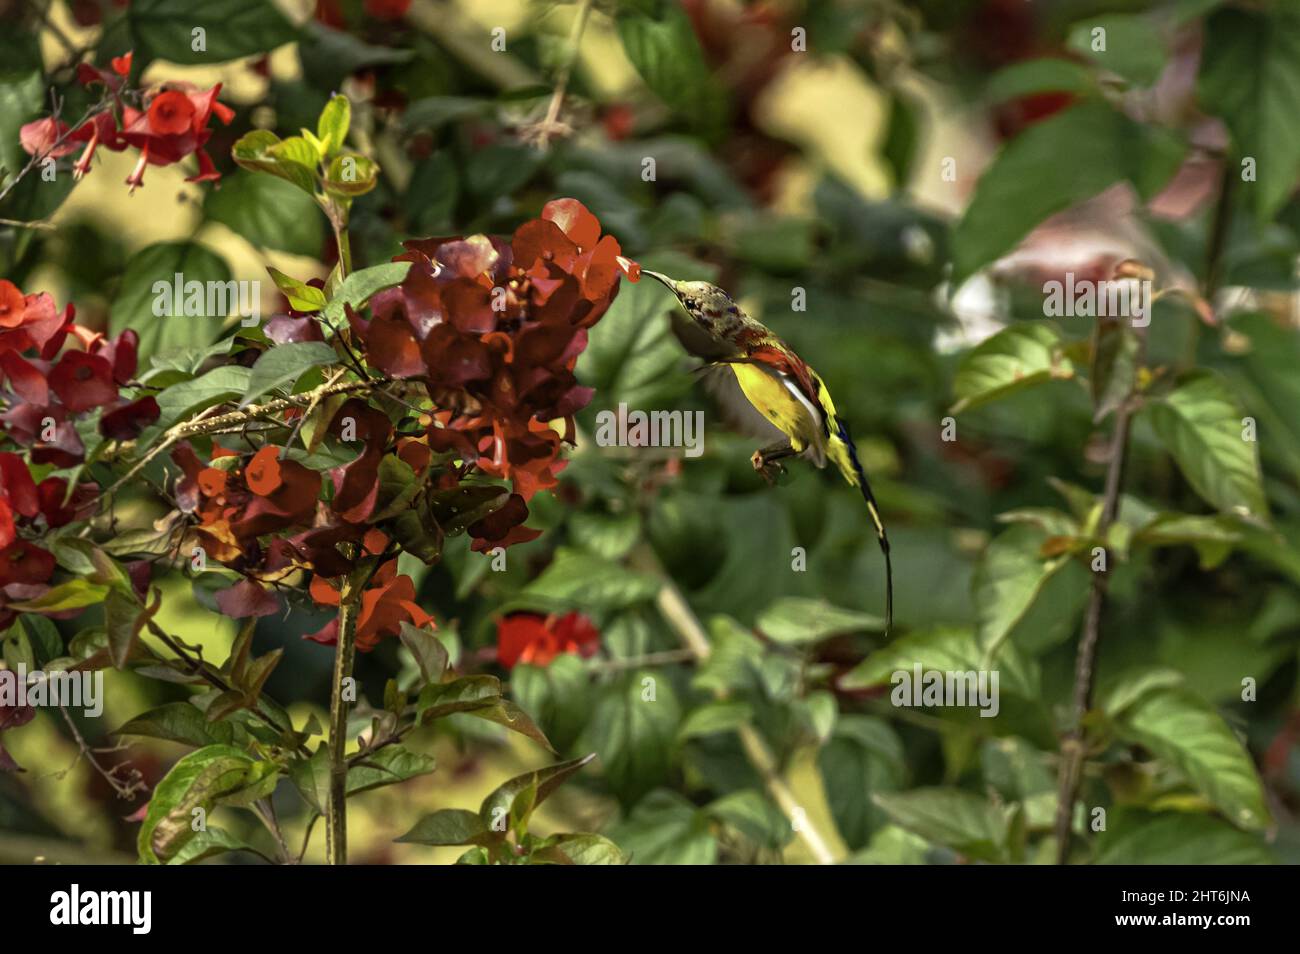 Shallow focus of a Mrs. Goulds sunbird on a branch of Holmskioldia plant with a blurry background Stock Photo